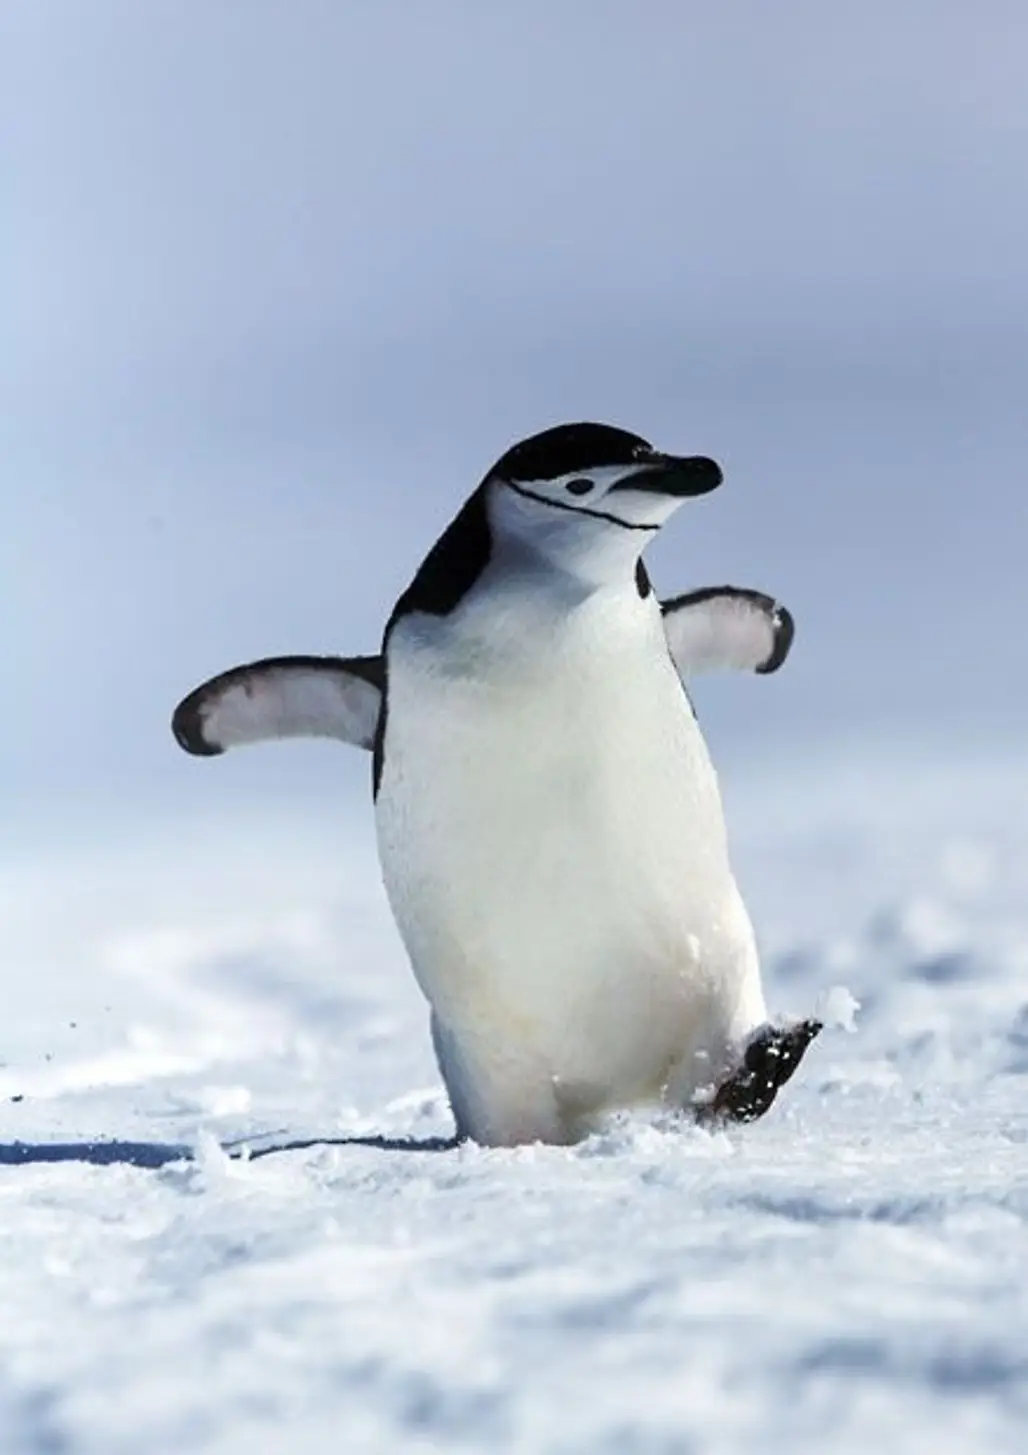 "I'm Auditioning for the New Happy Feet the Sequel"